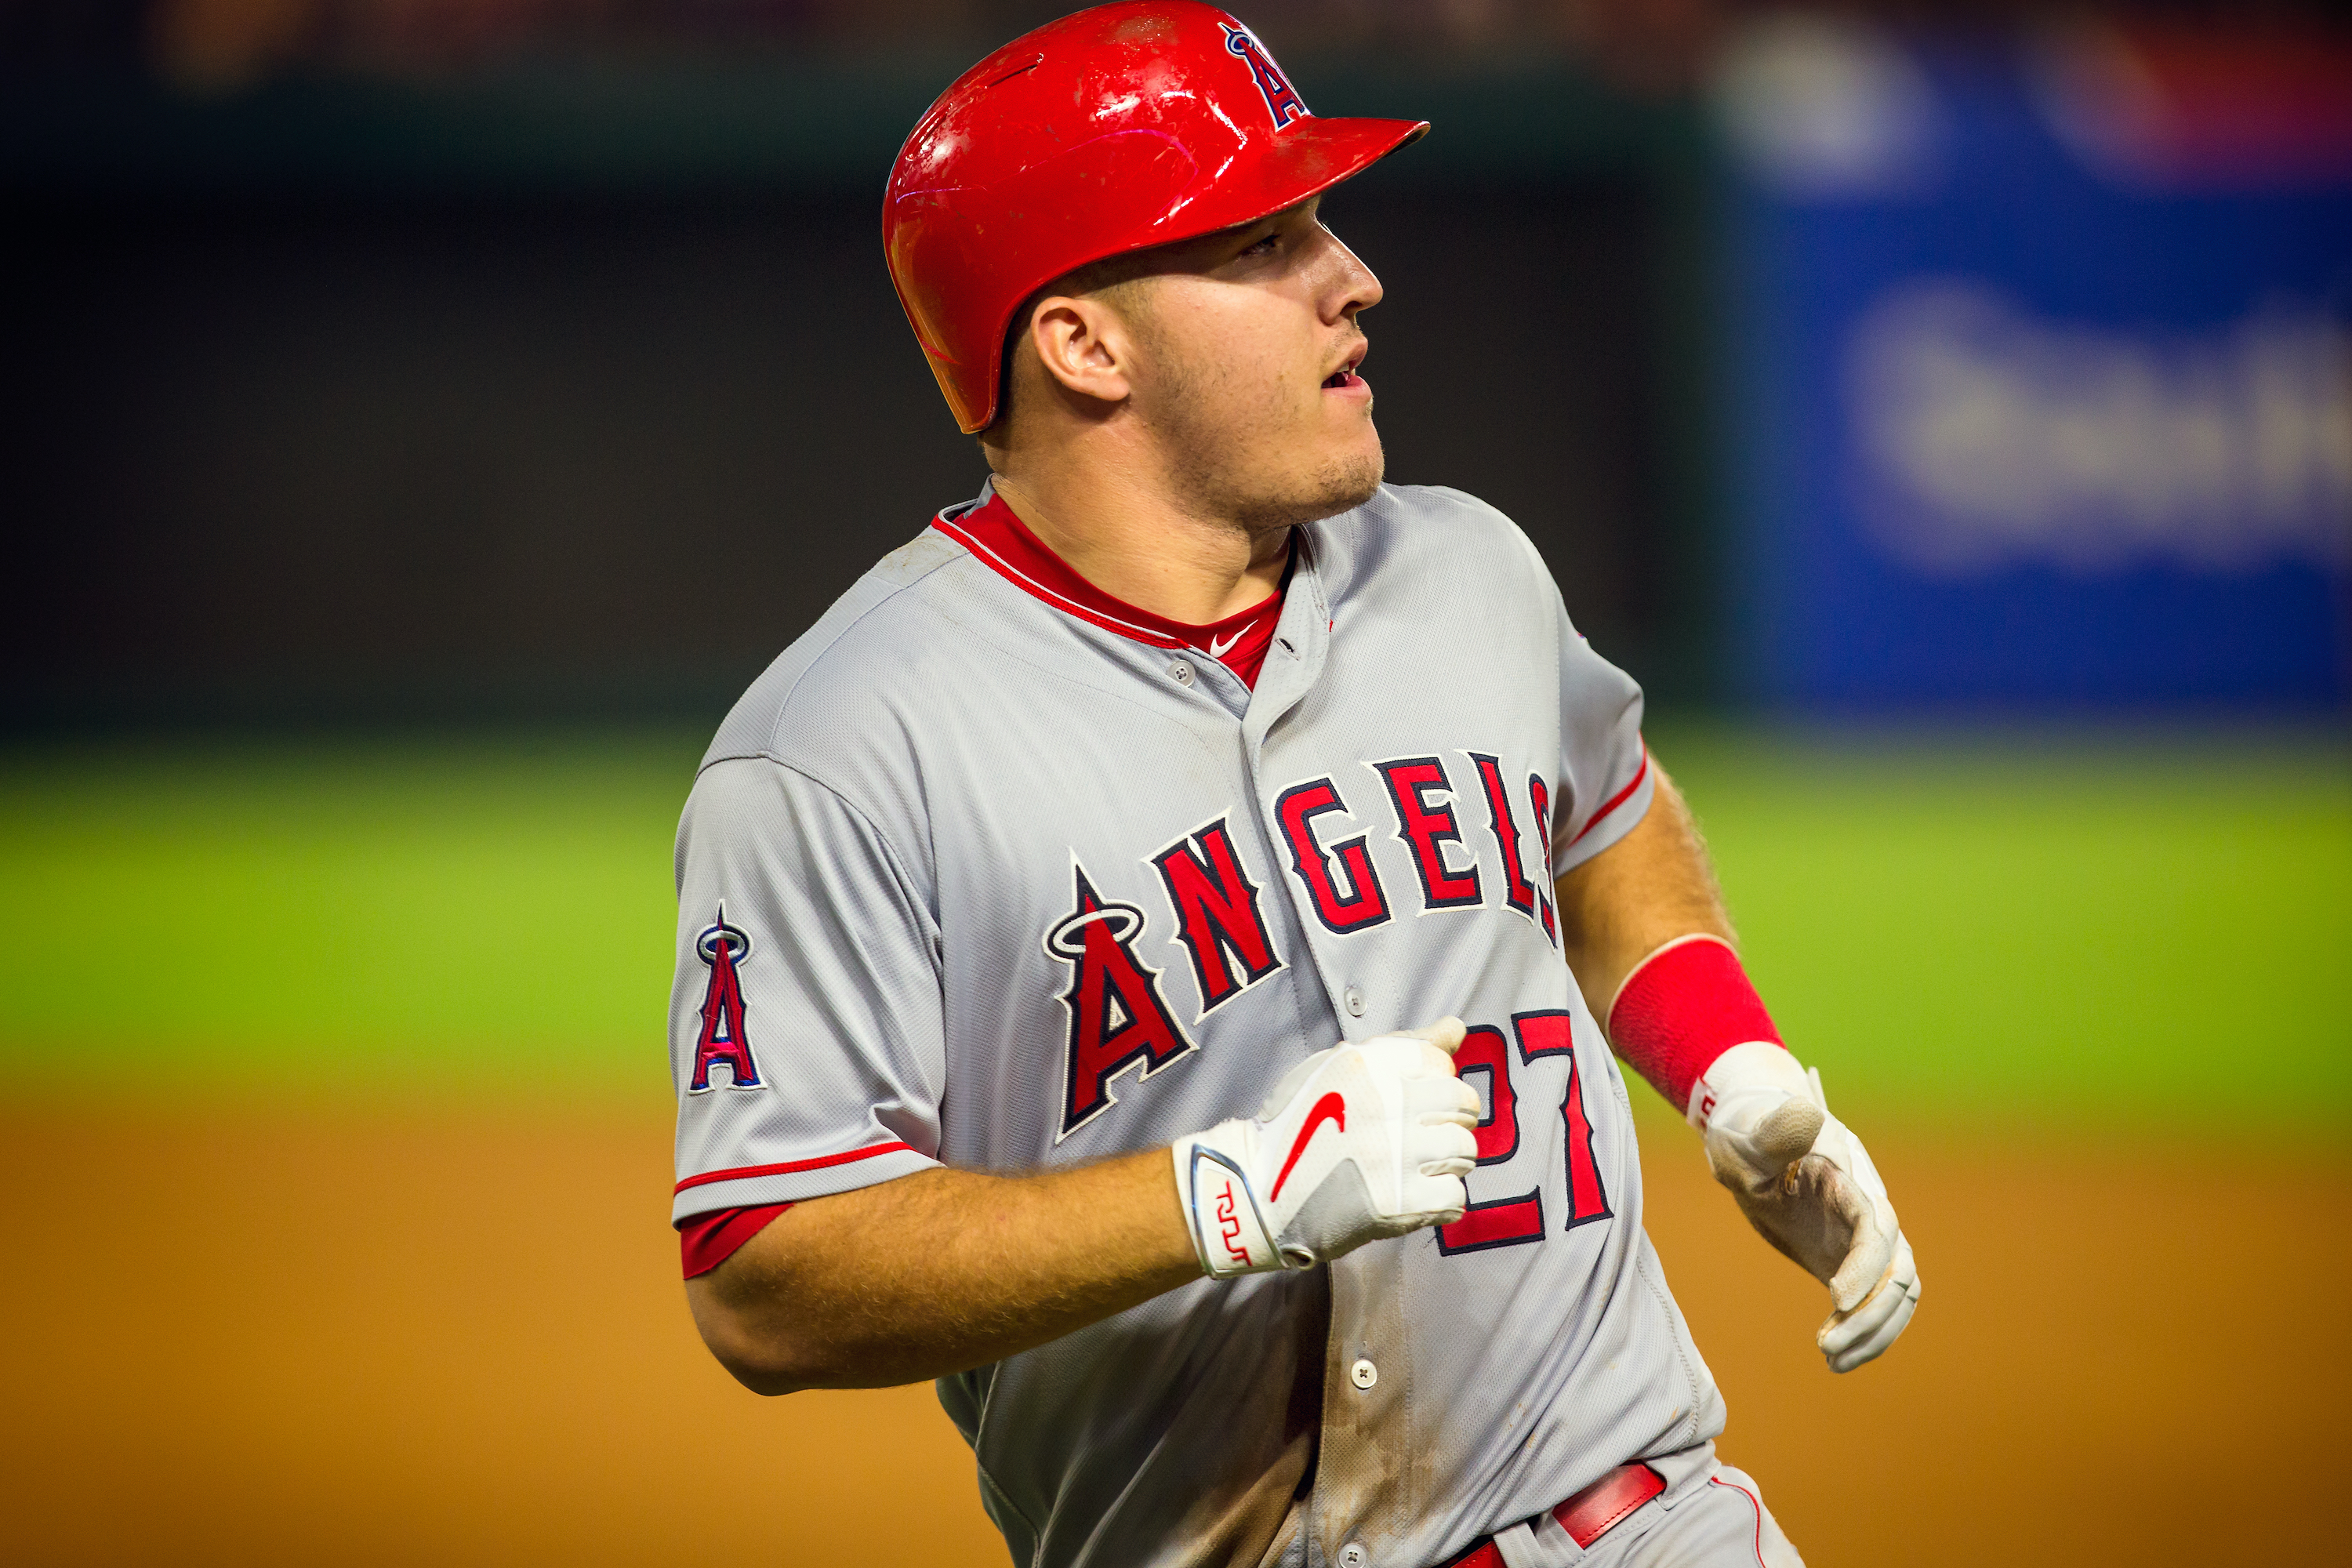 Mike Trout agrees Shohei Ohtani 'won Round 1' between them, thanks